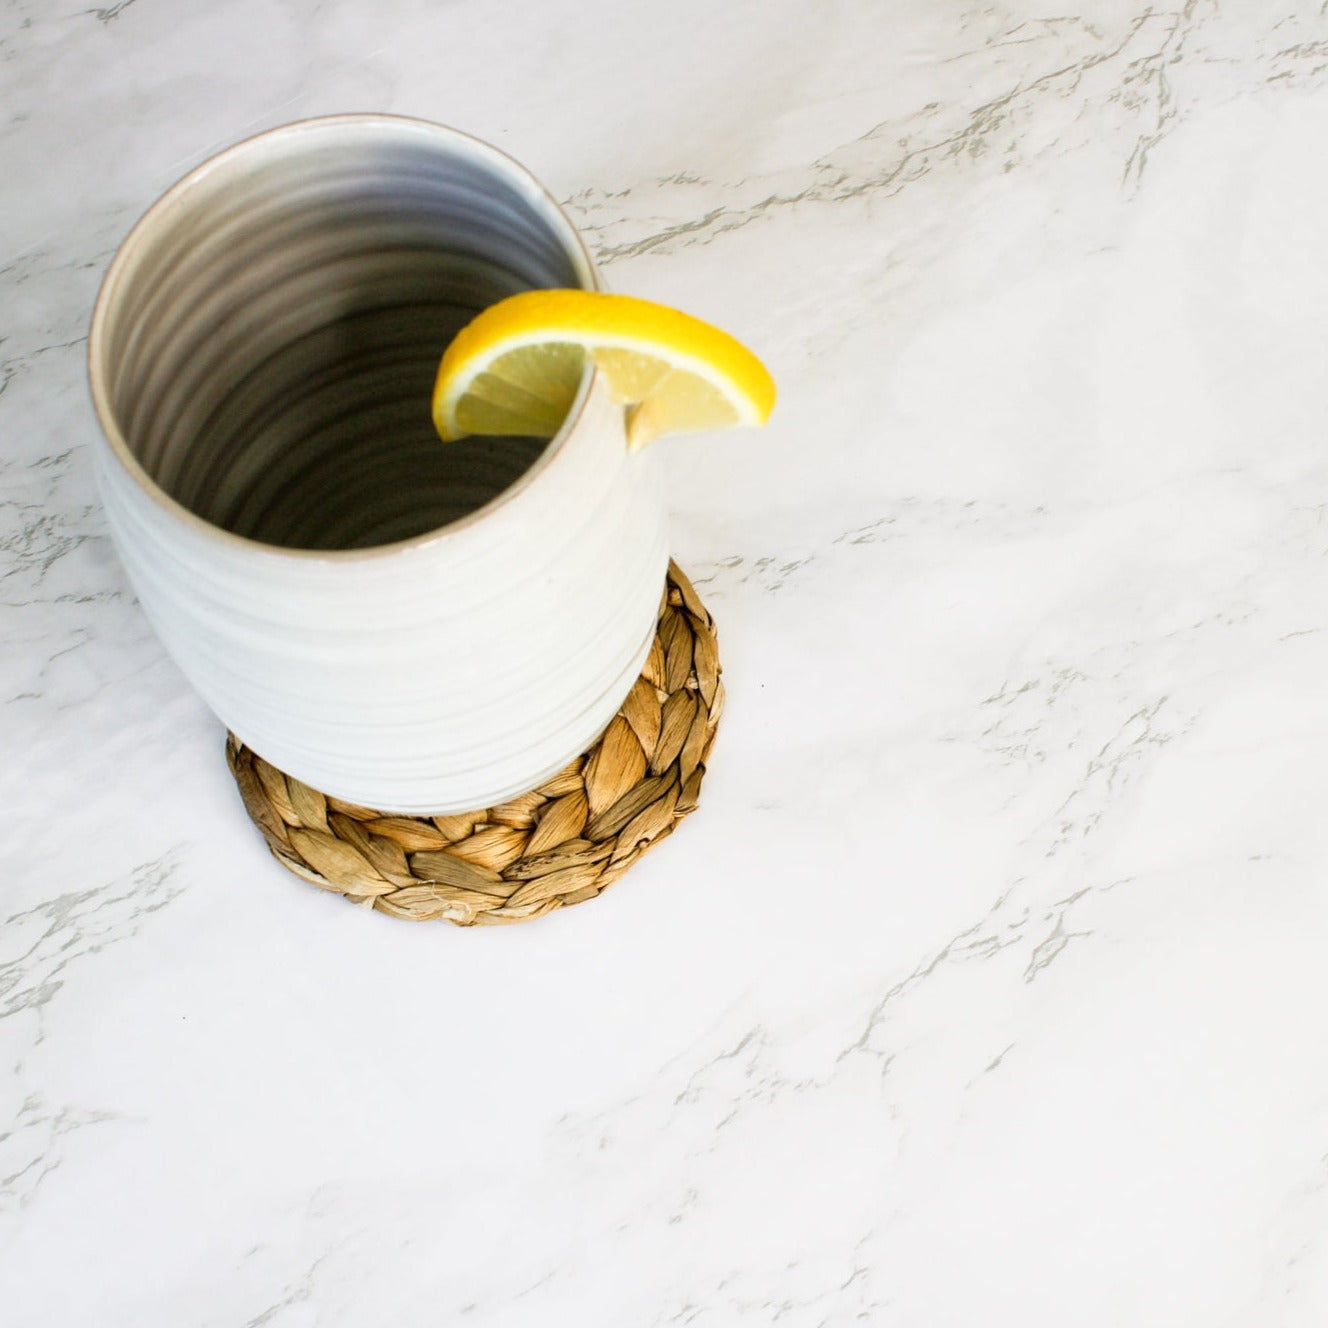 On a marble counter, sits our seagrass coaster and our tall tumbler with a lemon on the rim.